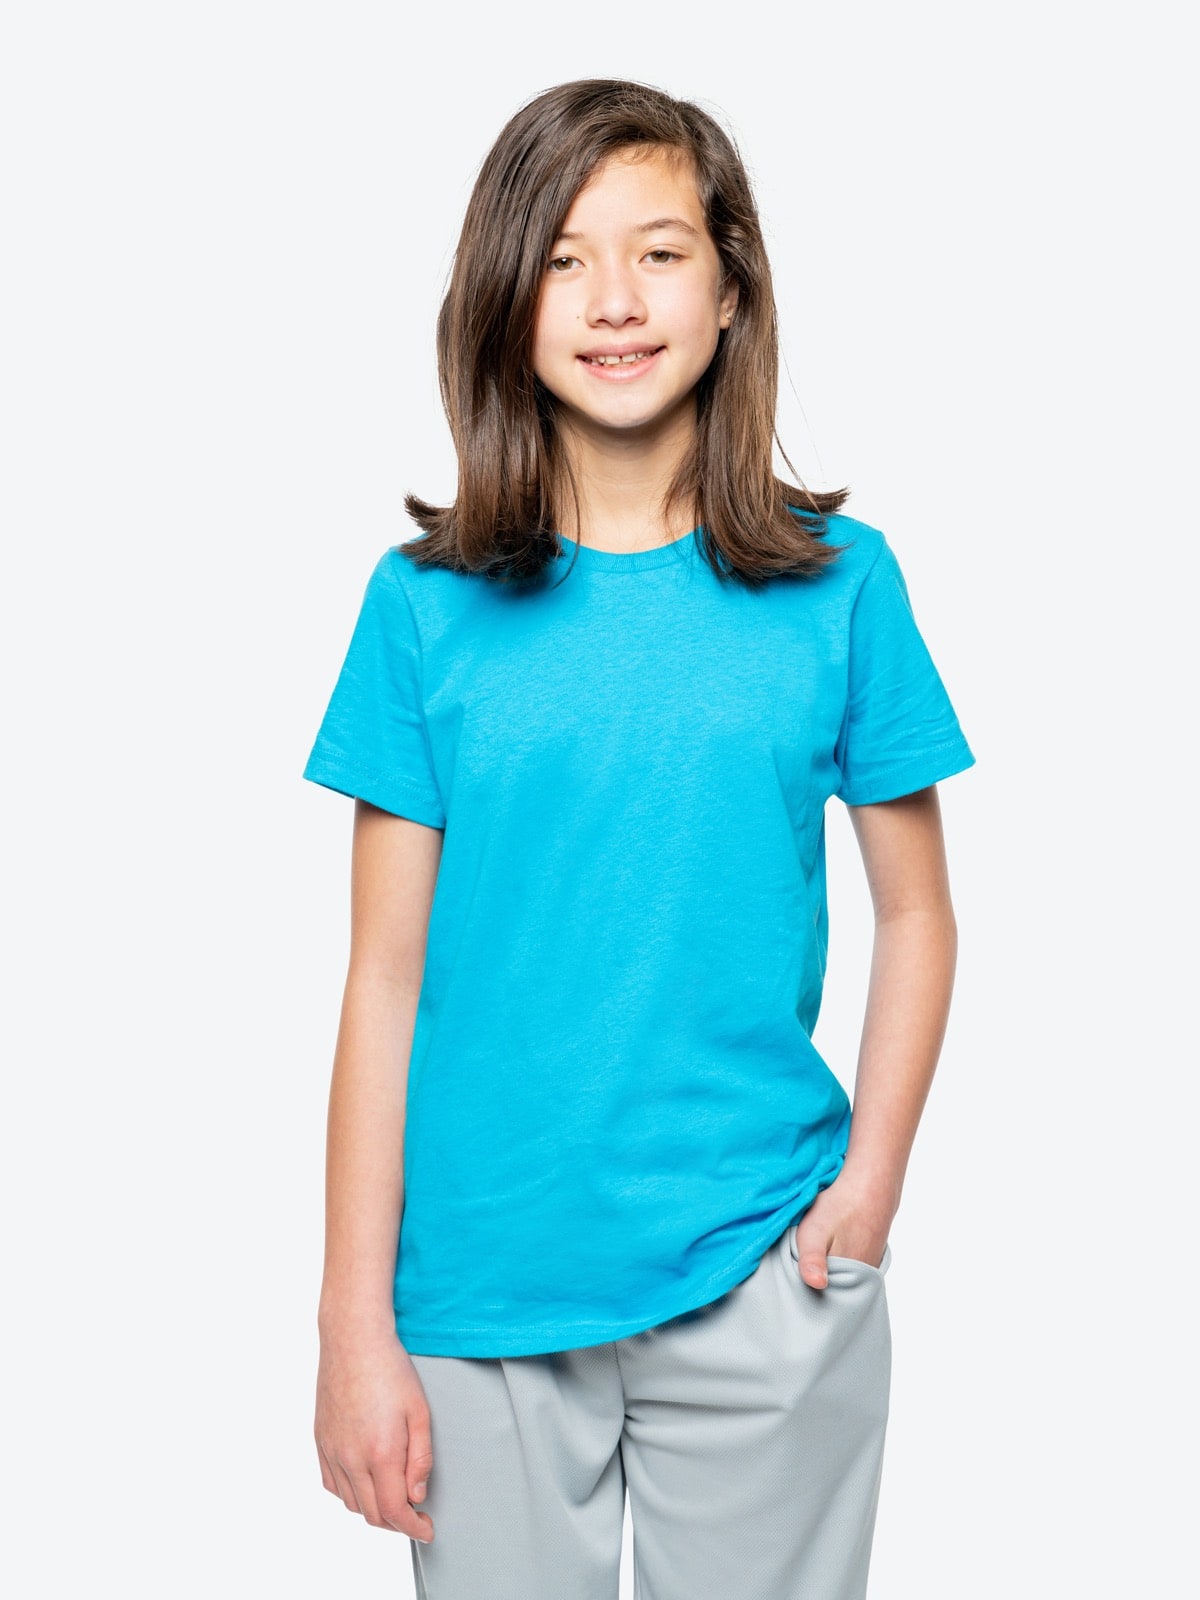 Insect Shield Youth Short Sleeve T-Shirt